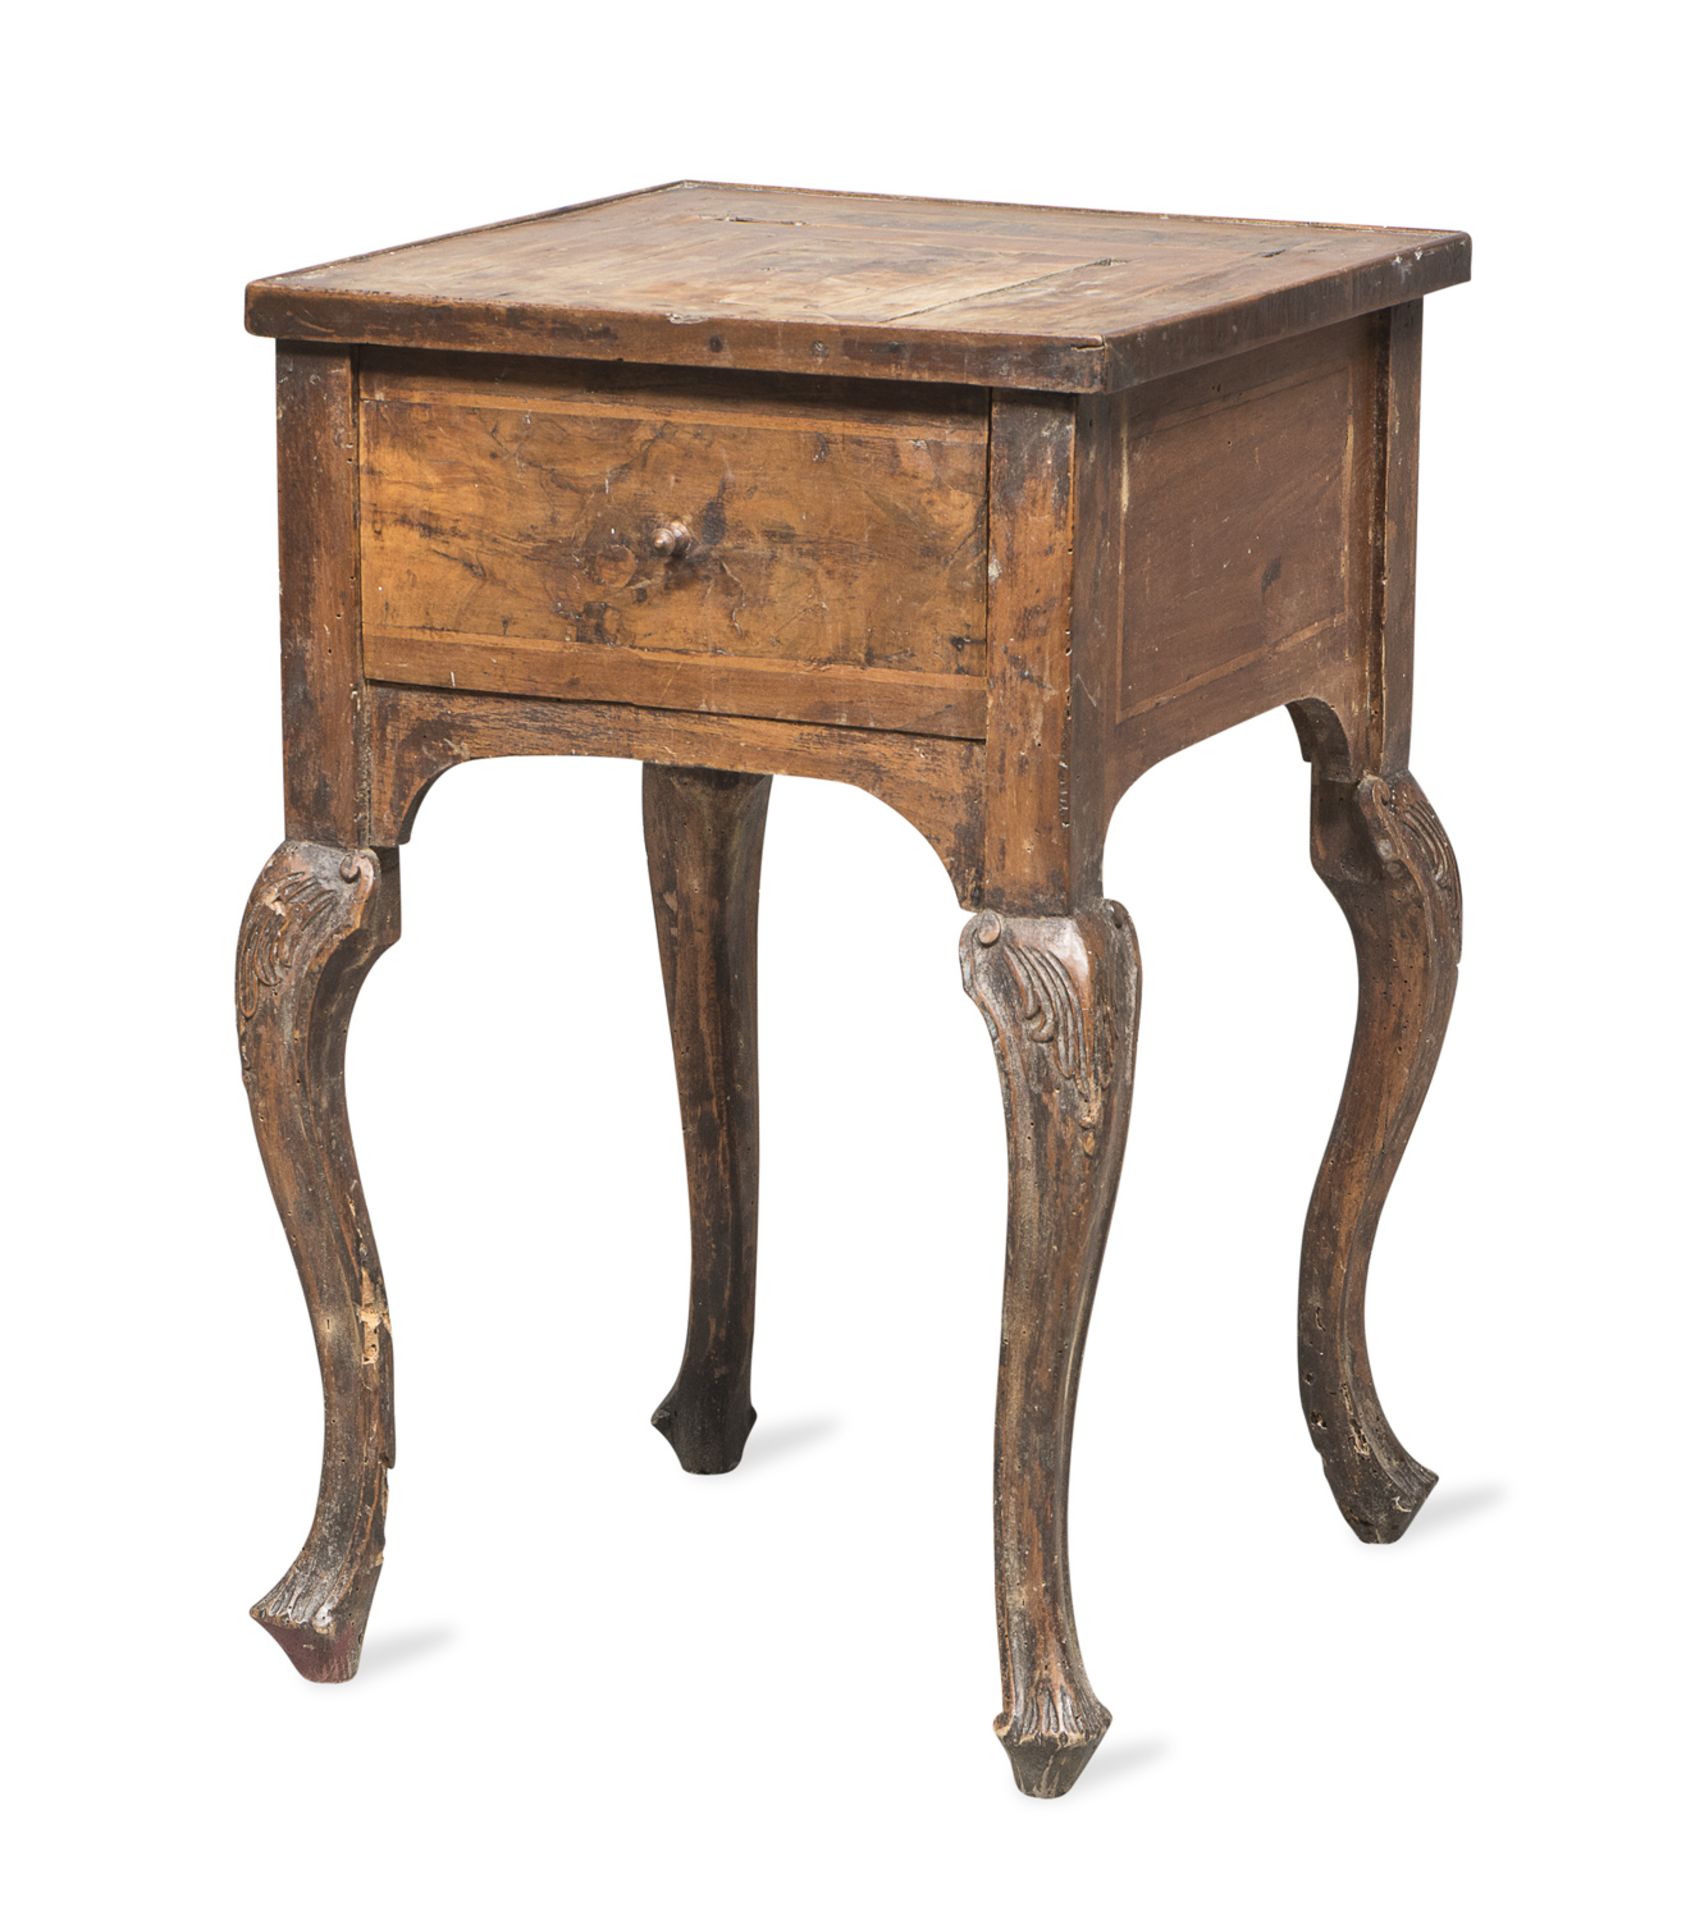 BEDSIDE TABLE IN CHERRY VENETO LATE 18TH CENTURY